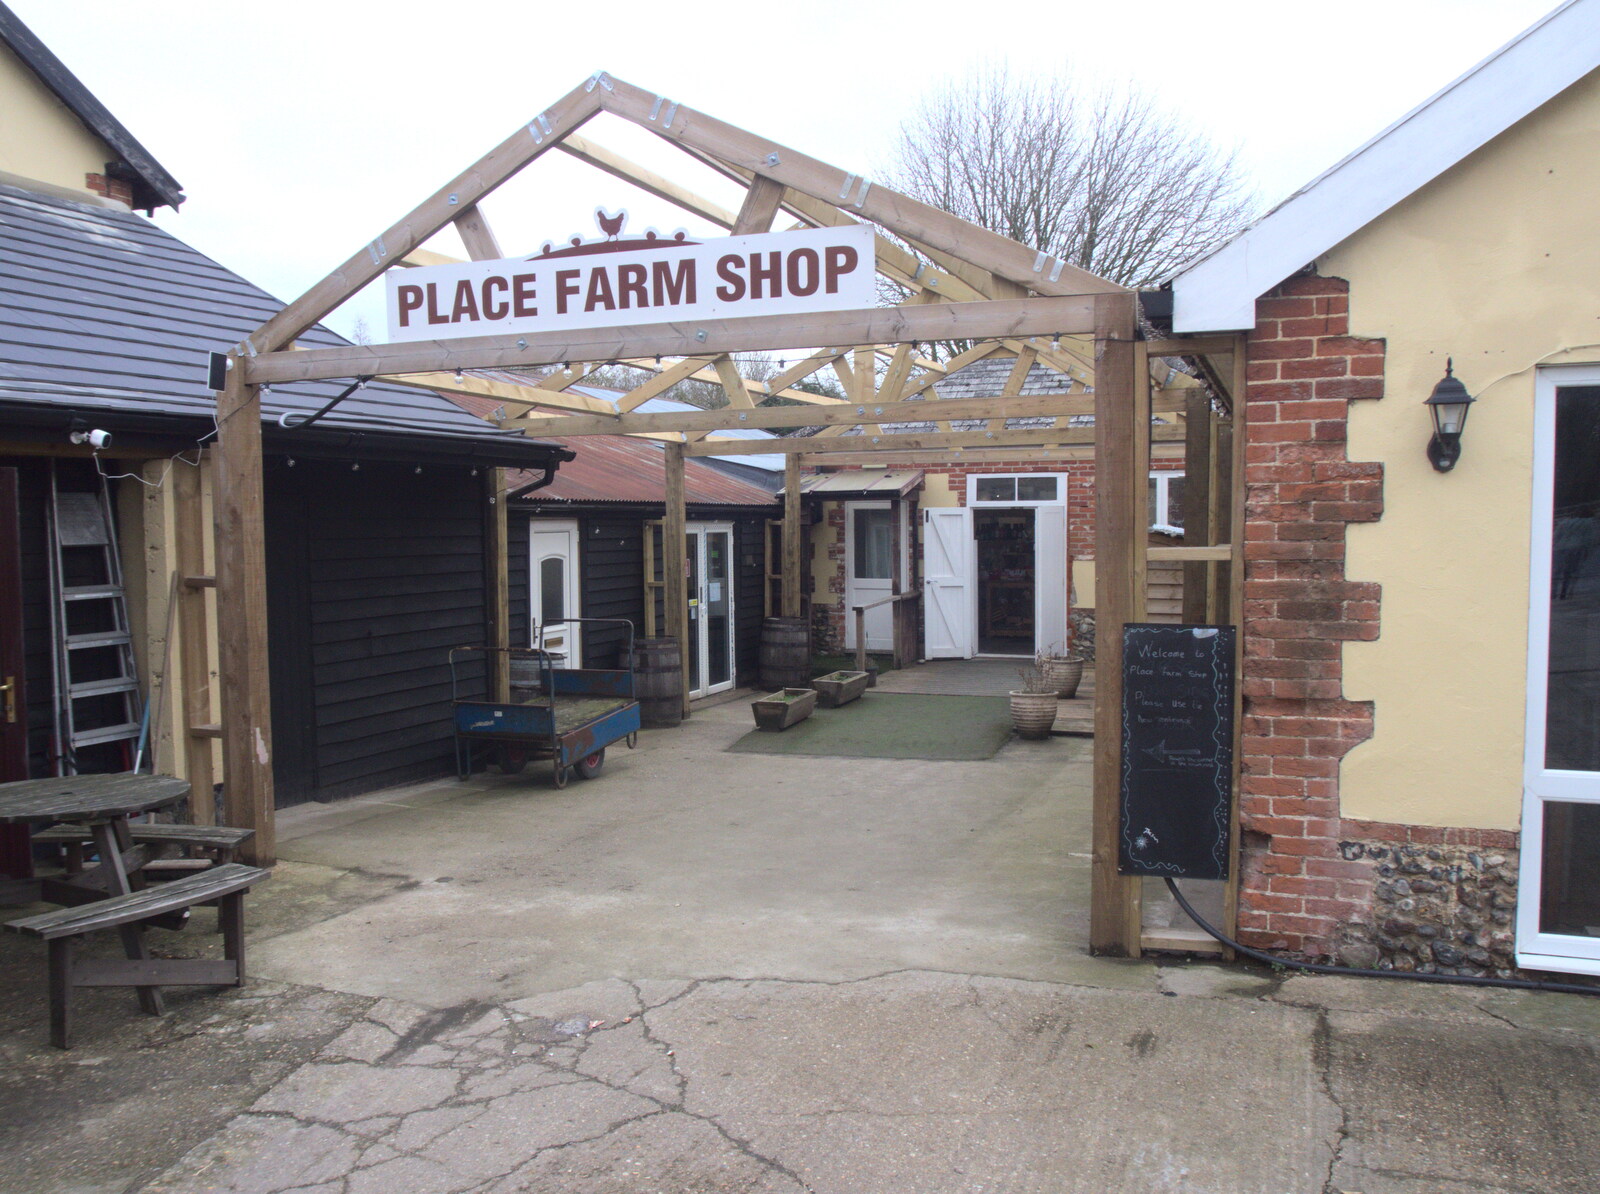 We stop off at Stuston Farm shop - once Peacocks from Dolphin House Fire and an Escape Room, Diss and Norwich - 26th March 2023